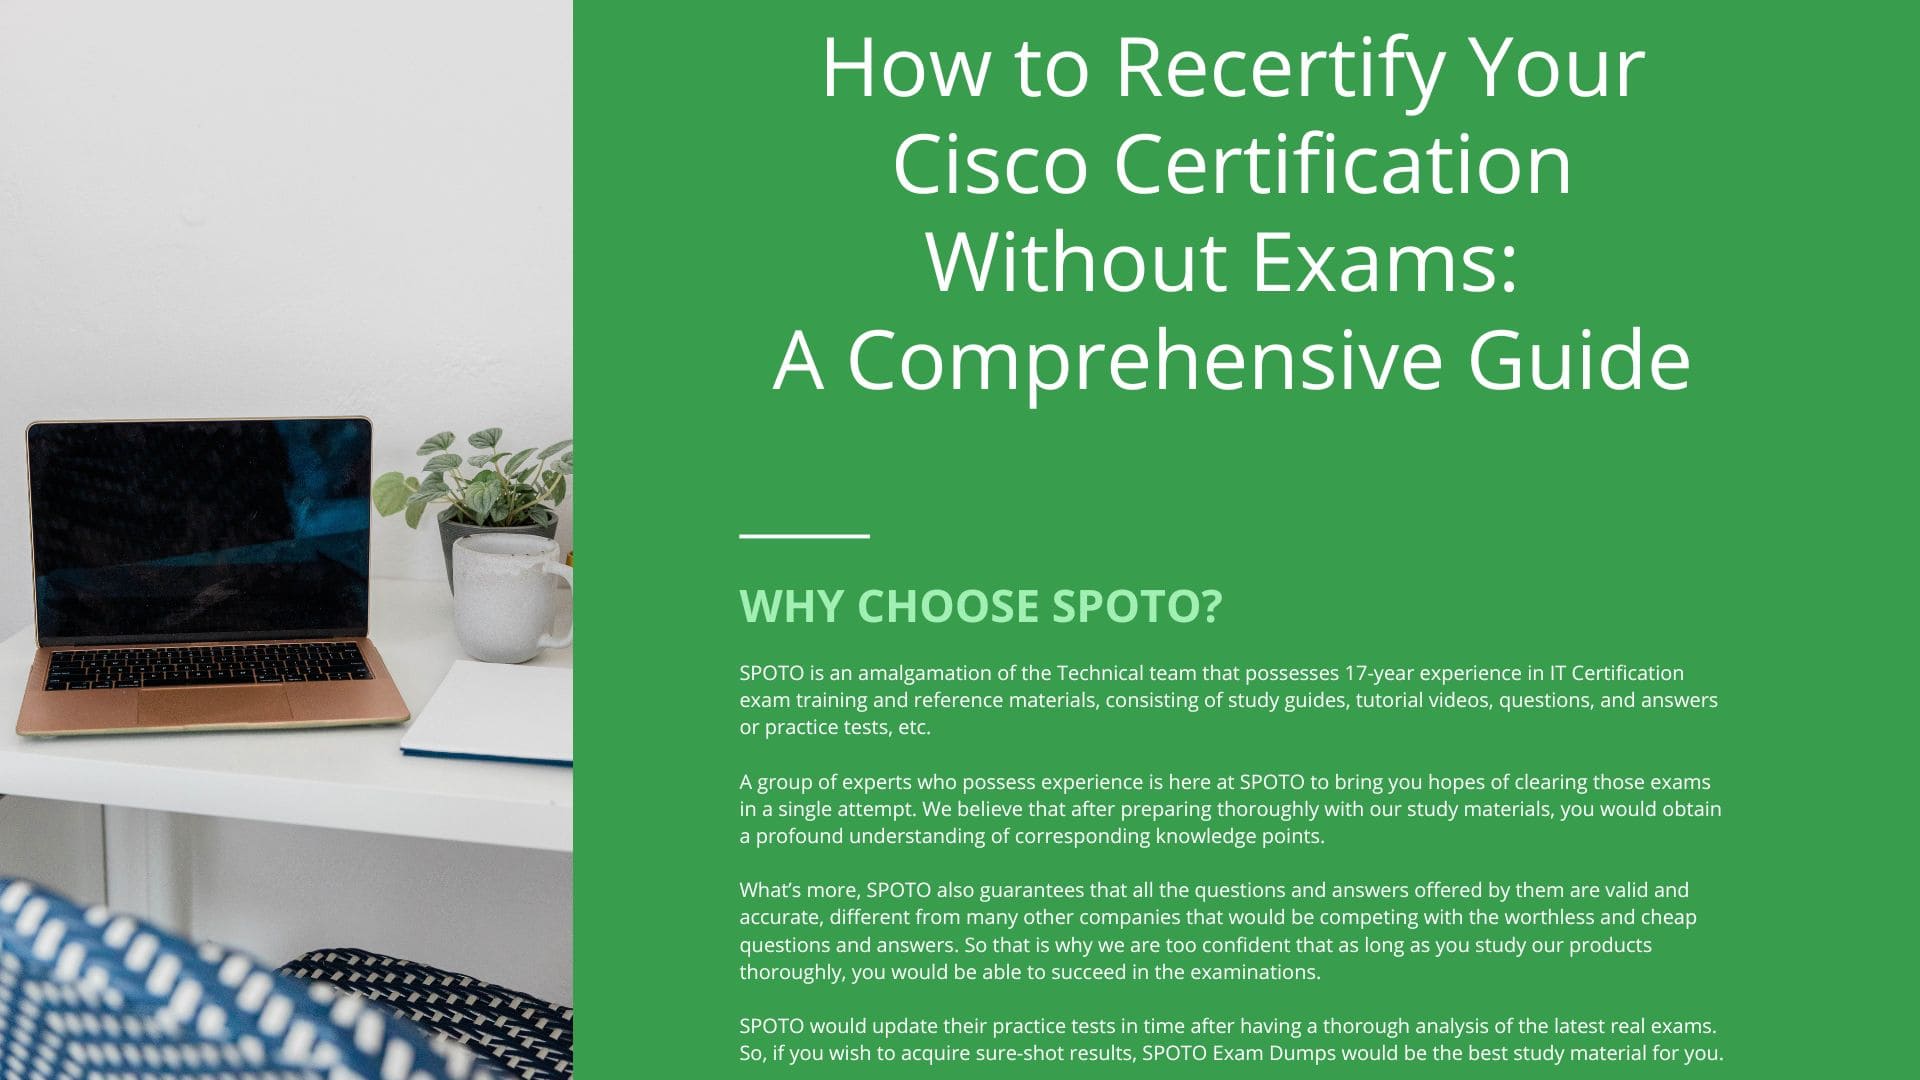 How to Recertify Your Cisco Certification